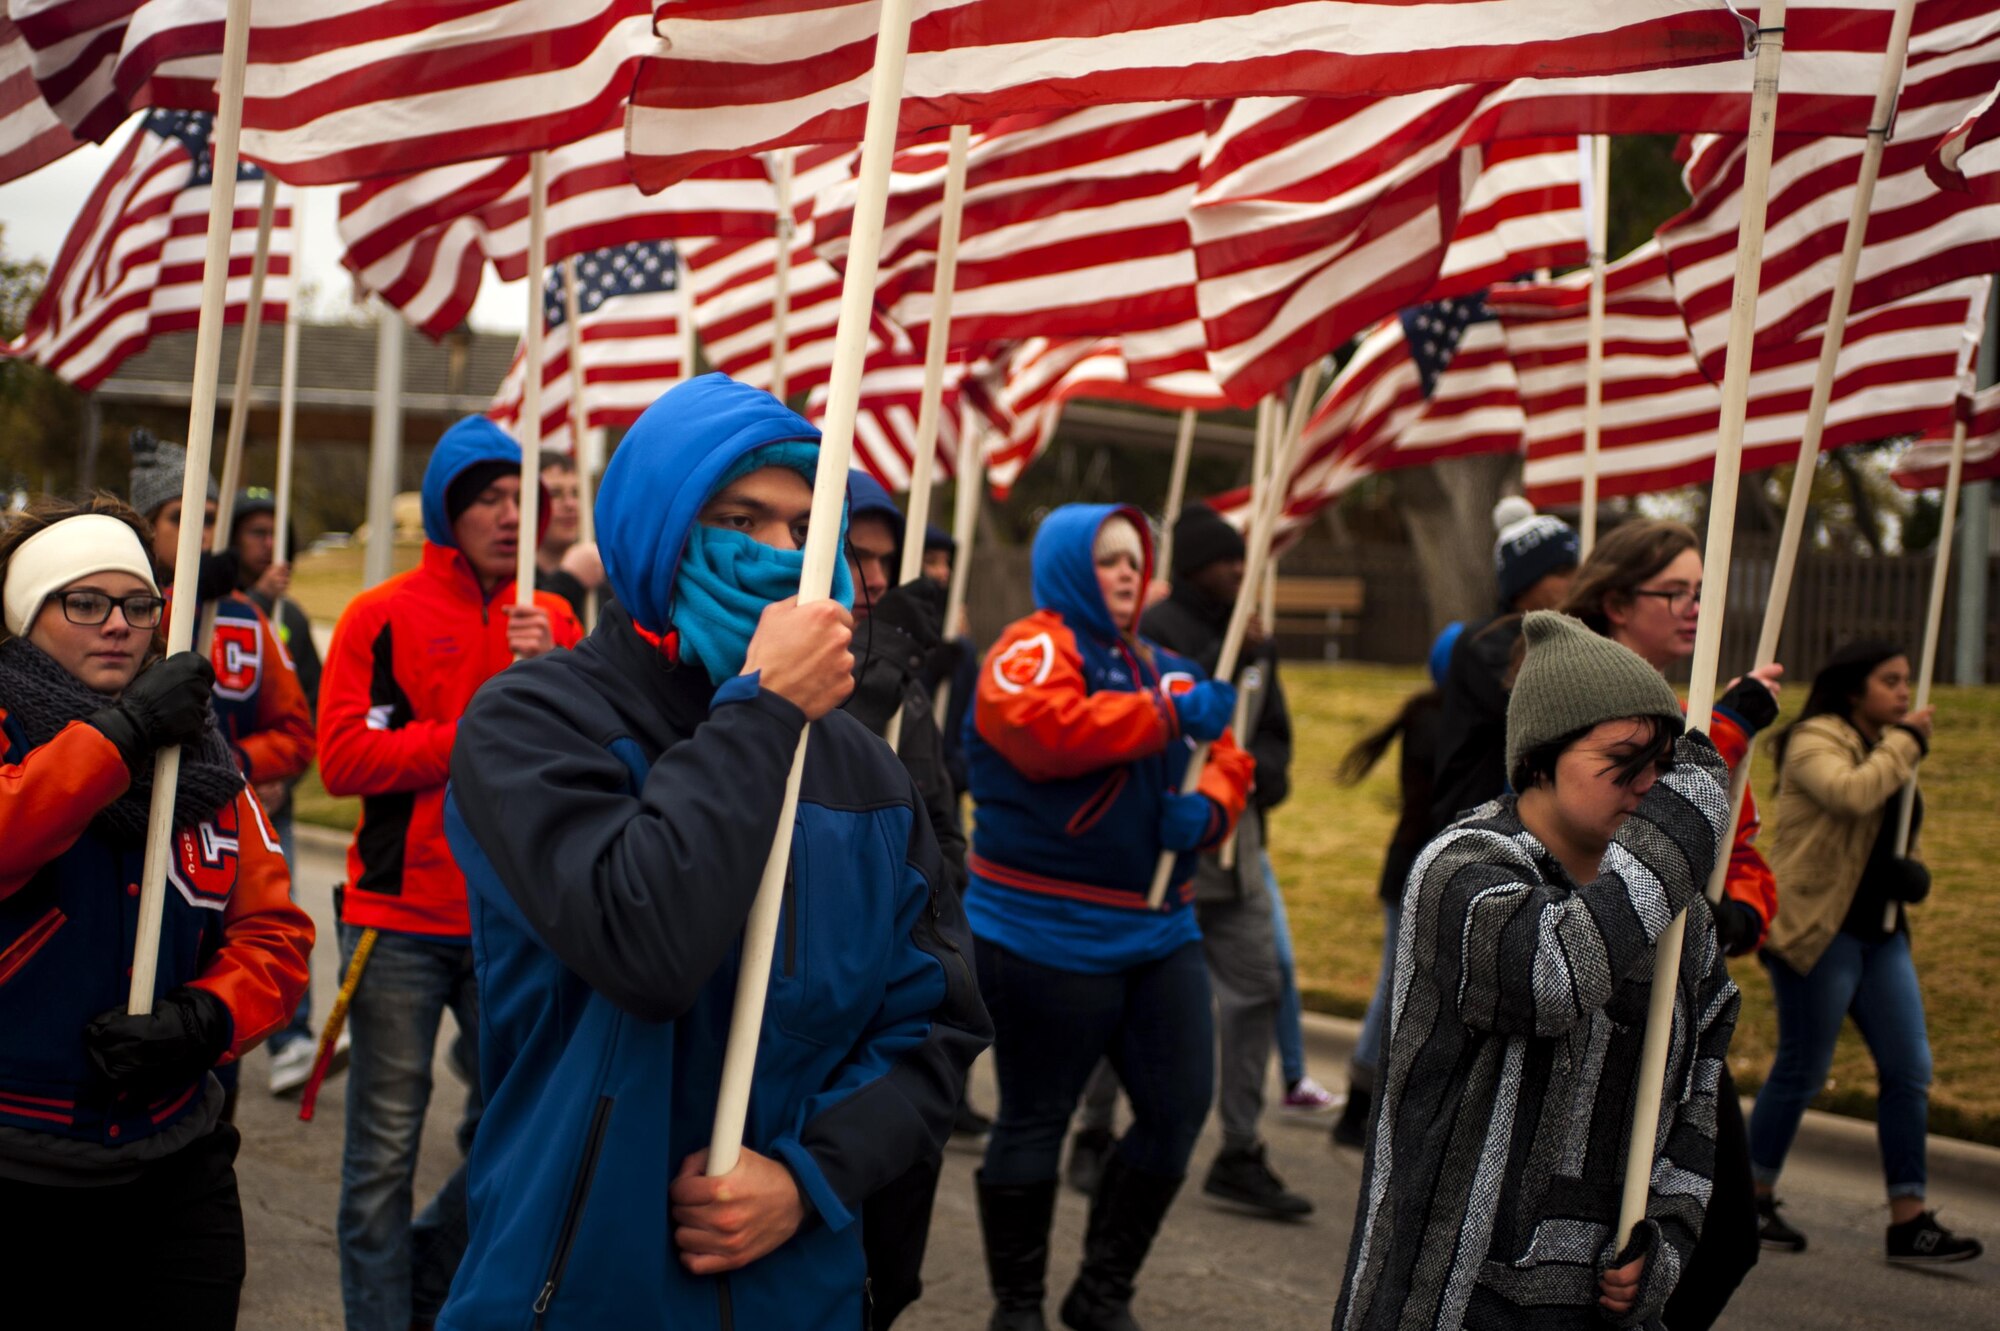 Central High School students bear flags during the Heroes Hunt Parade at Santa Fe Park in San Angelo, Texas, Dec. 8, 2016. San Angelo hosts the Hero’s Hunt Parade for veterans from all over Texas to honor them for their service. (U.S. Air Force photo by Senior Airman Scott Jackson/released)